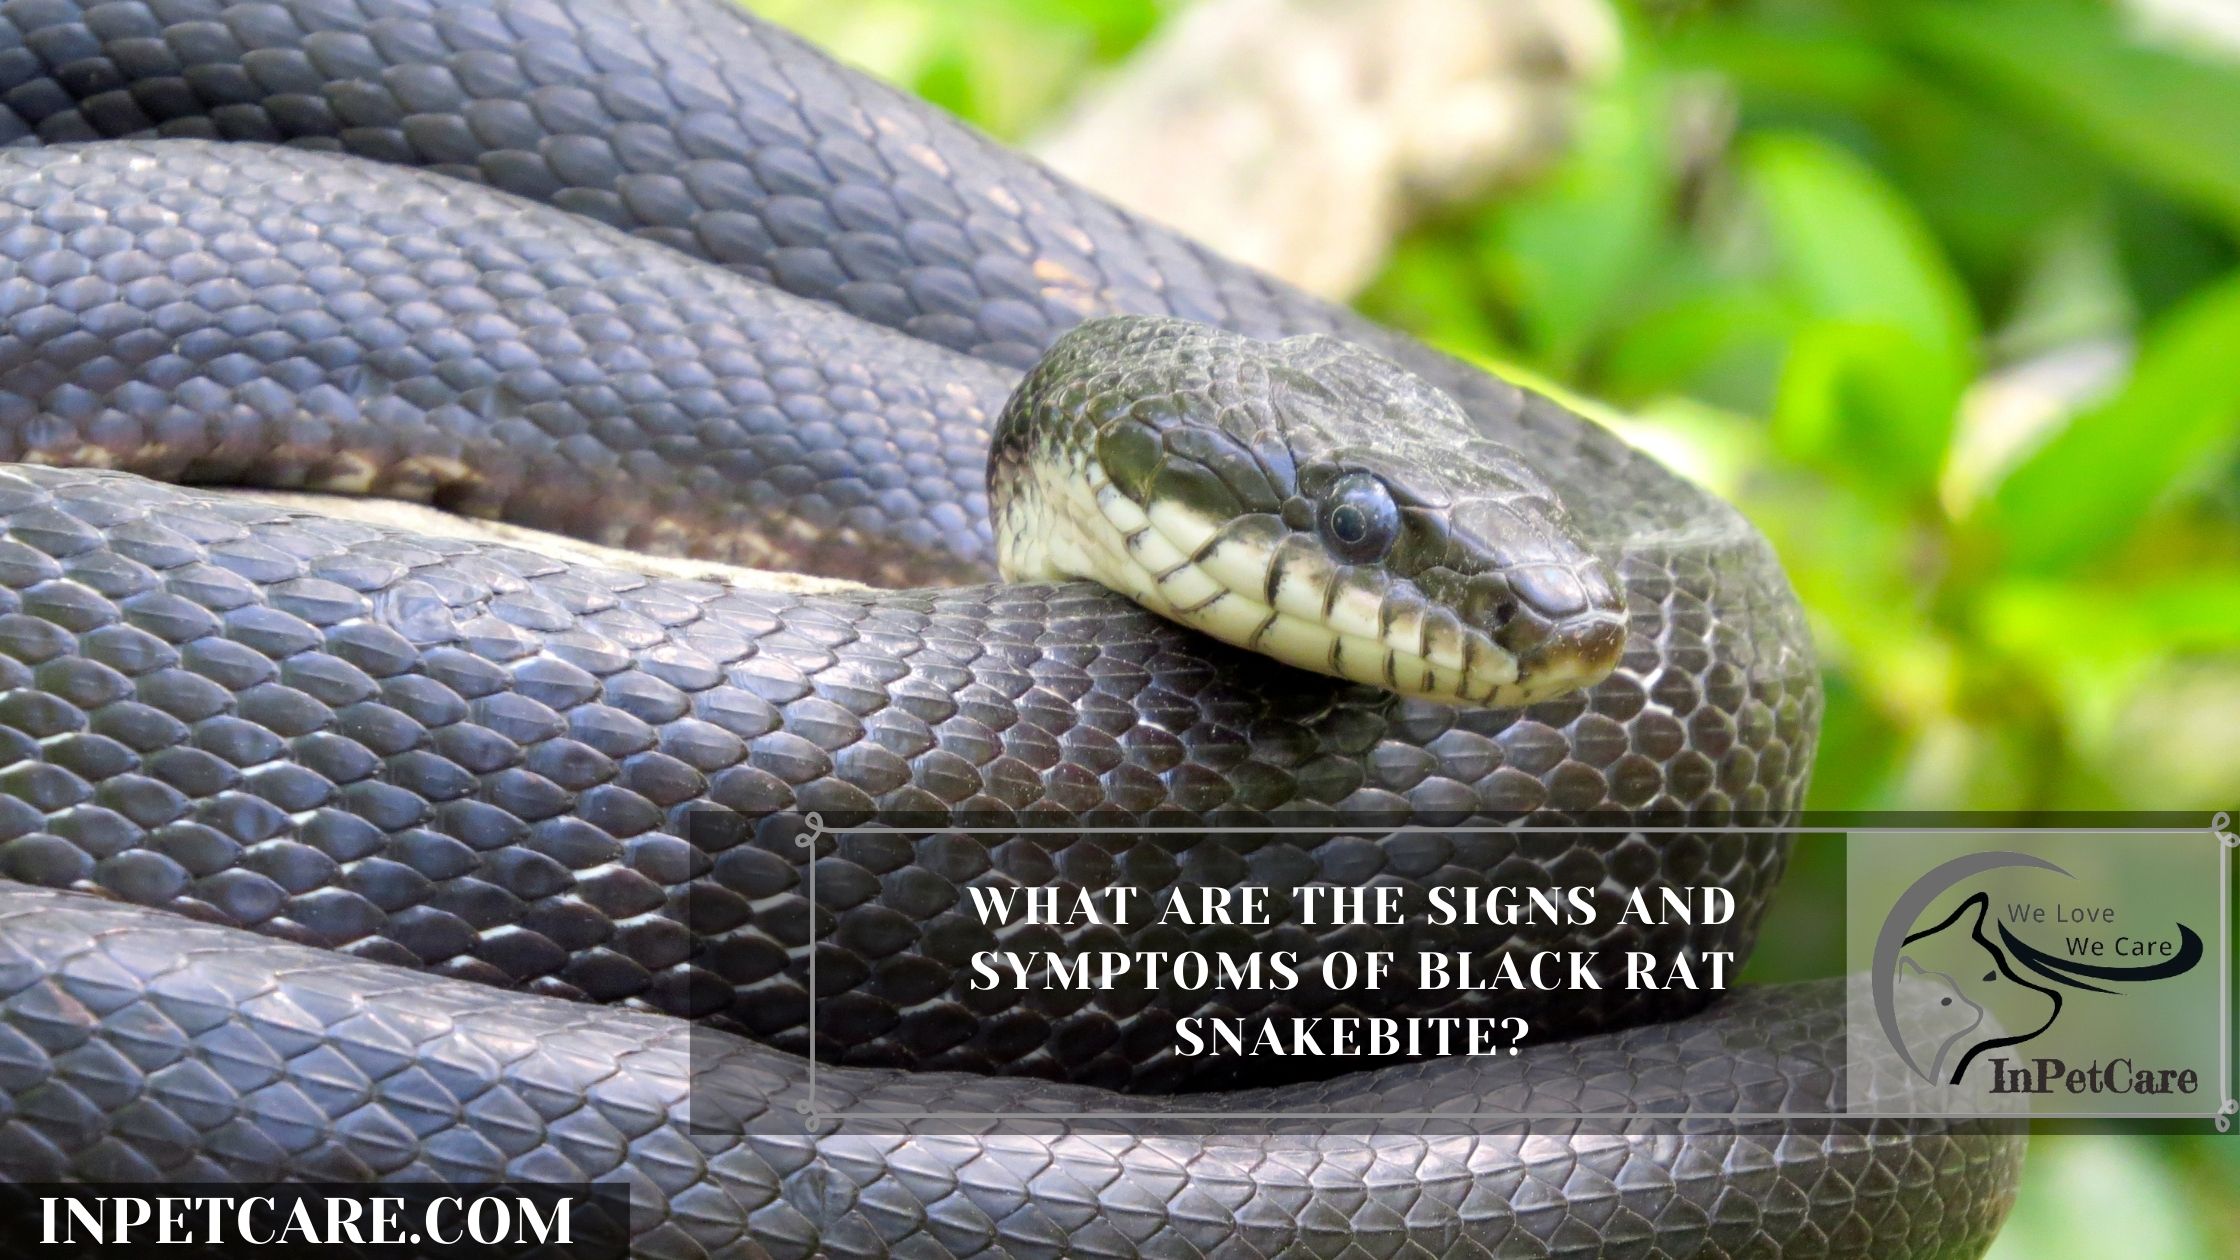 What Are The Signs and Symptoms Of Black Rat Snakebite?